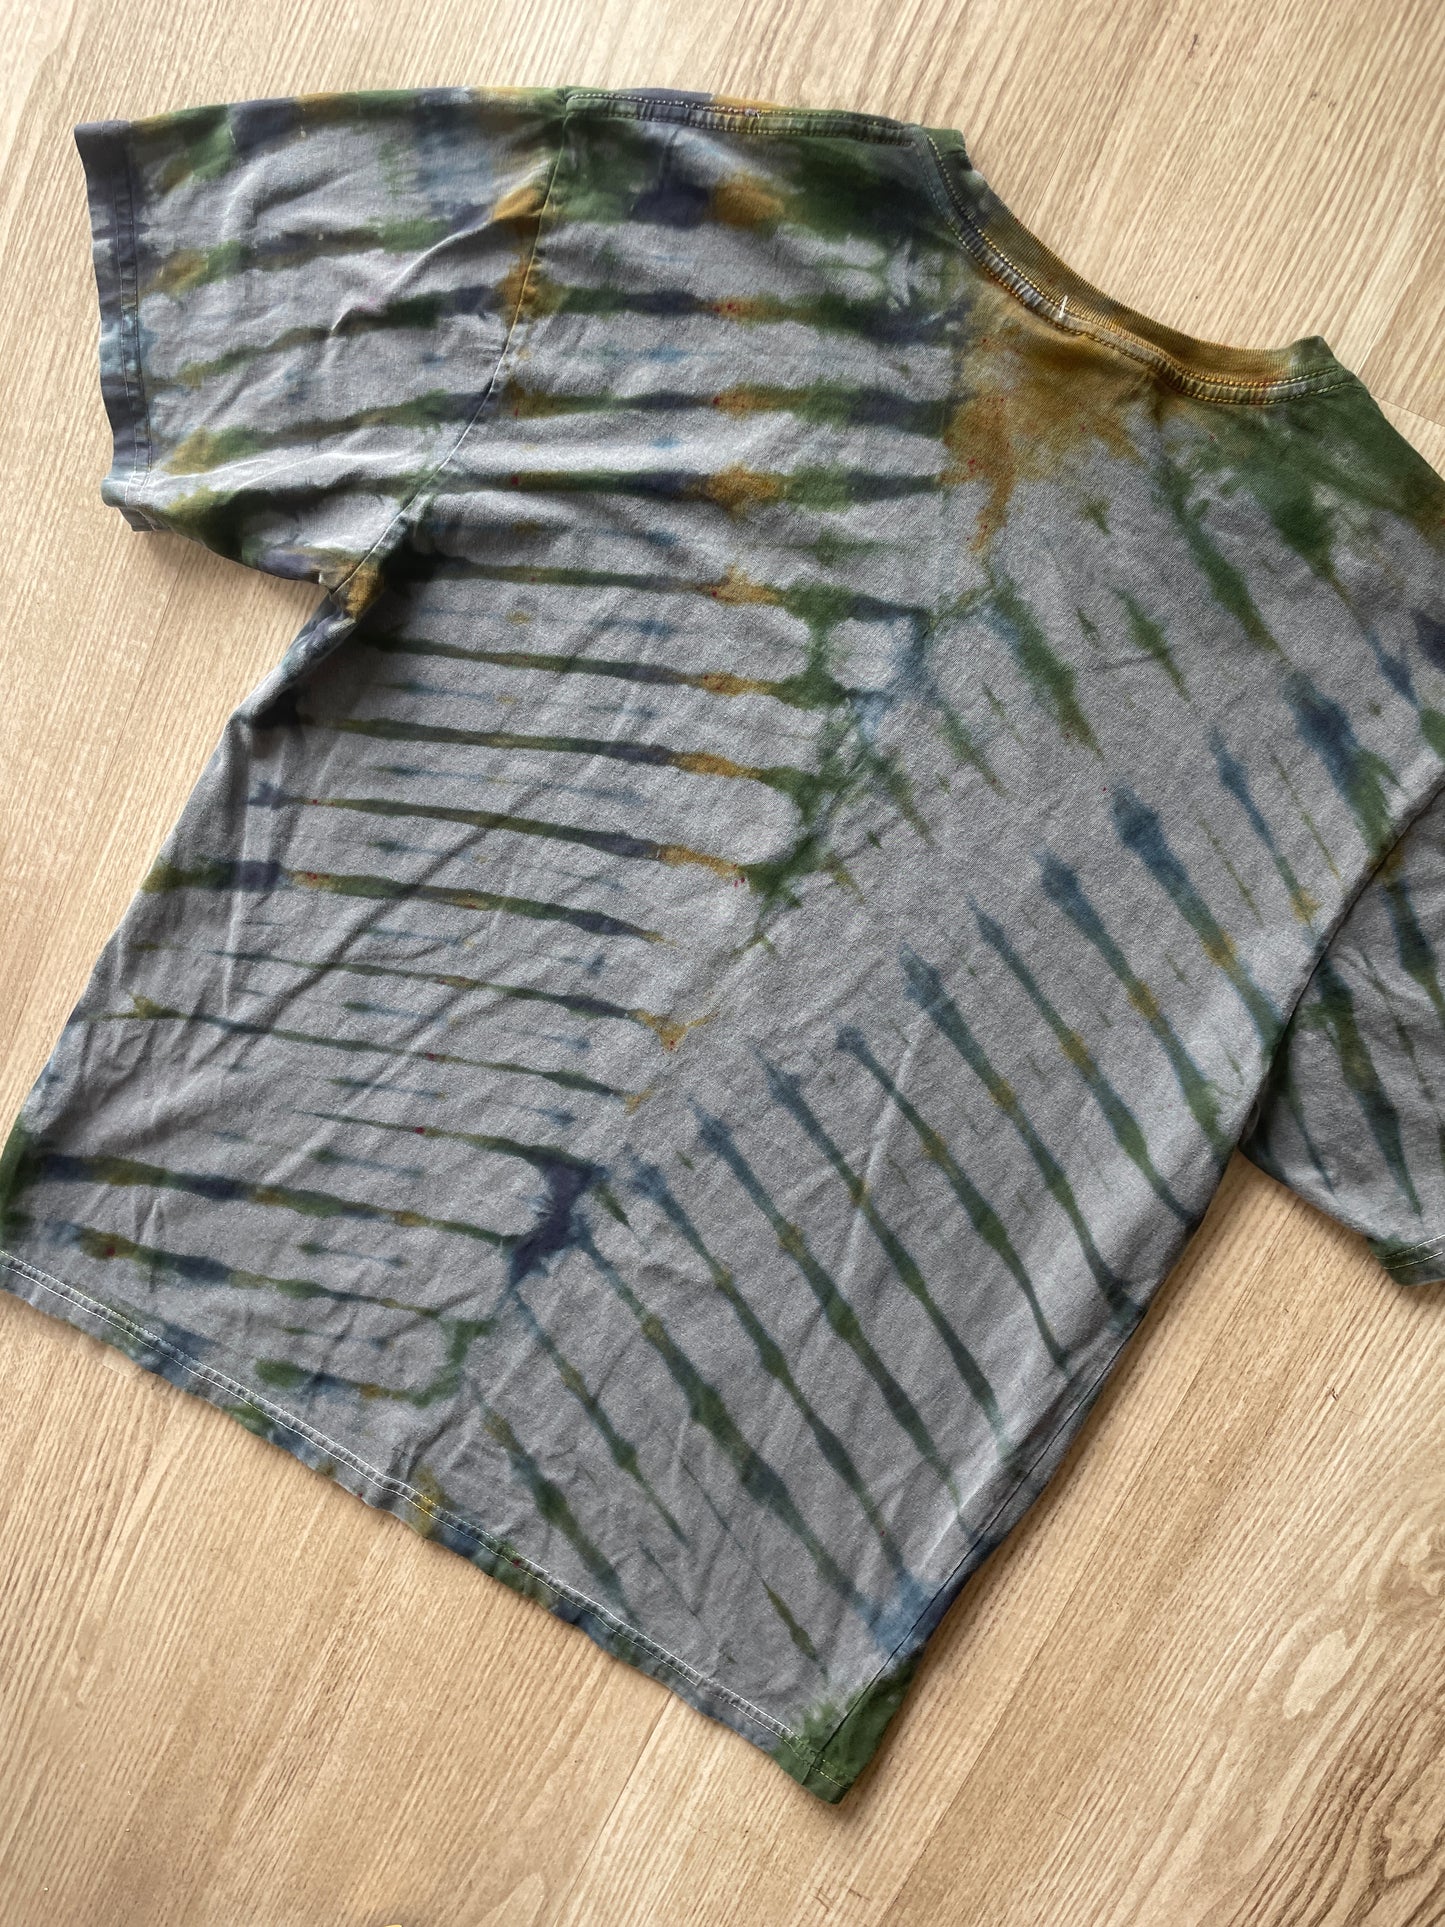 SMALL Men’s Earth Tones Handmade Tie Dye T-Shirt | One-Of-a-Kind Gray, Green, and Blue Pleated Short Sleeve